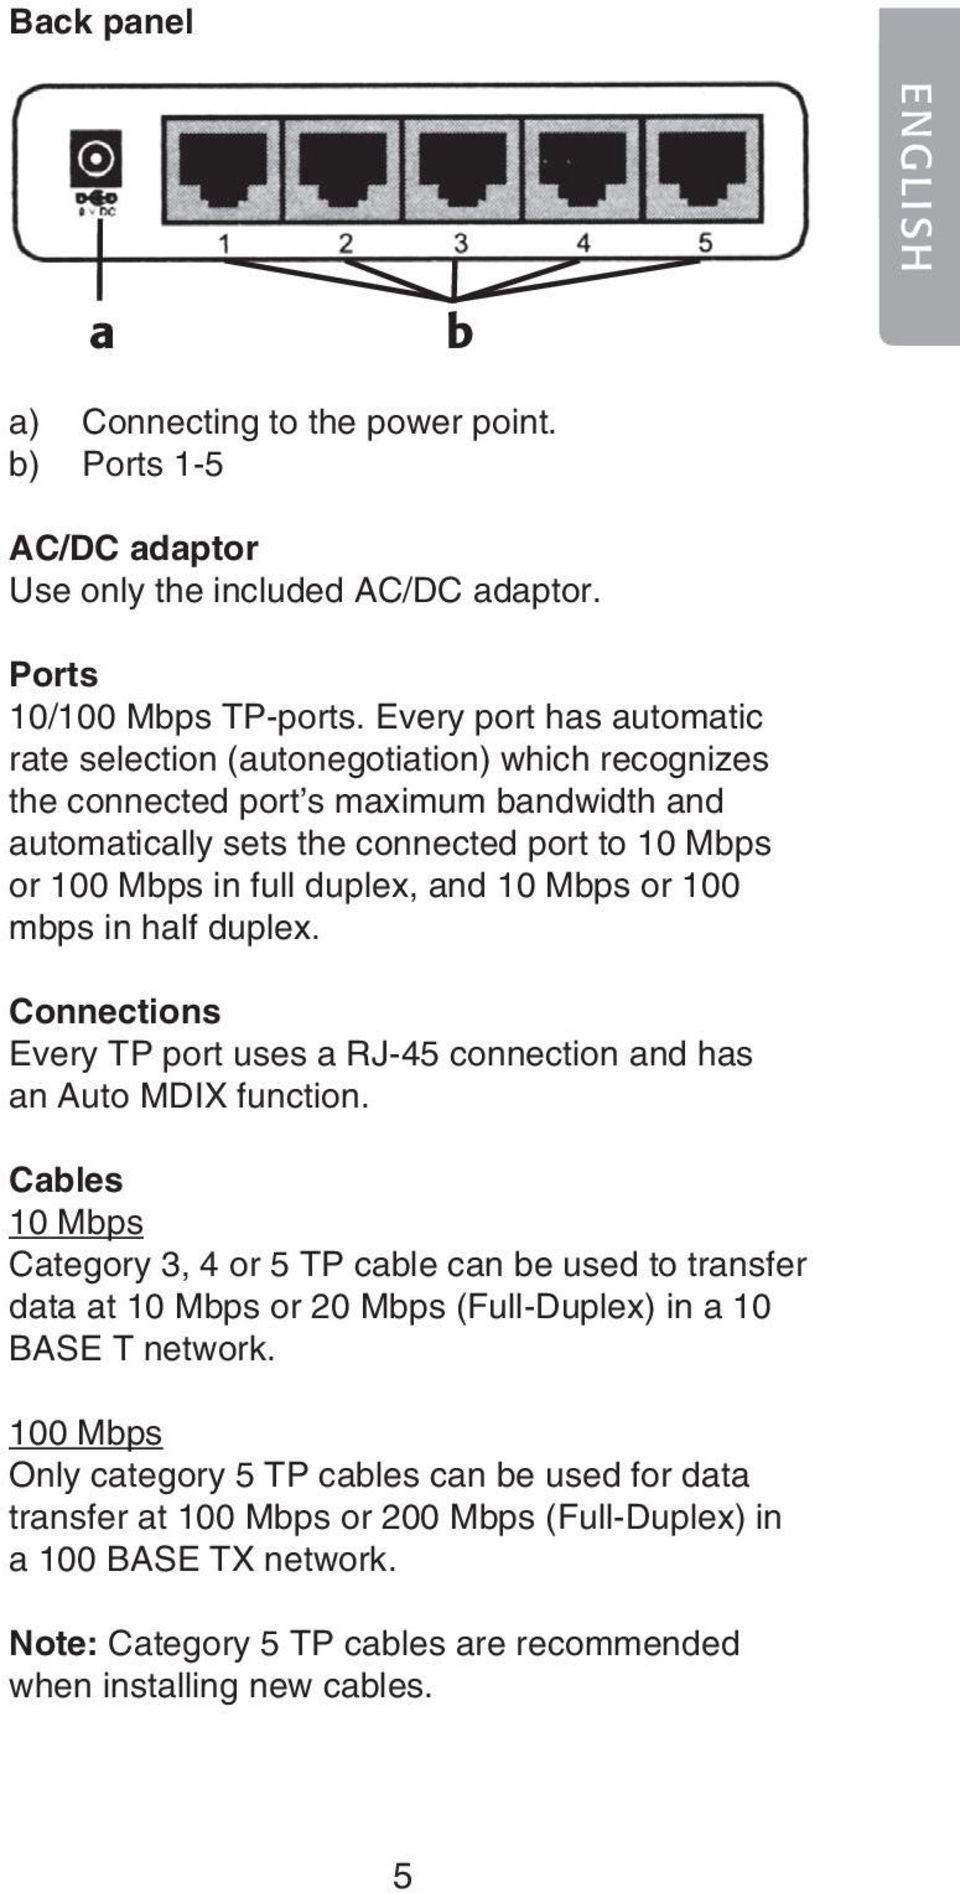 10 Mbps or 100 mbps in half duplex. Connections Every TP port uses a RJ-45 connection and has an Auto MDIX function.